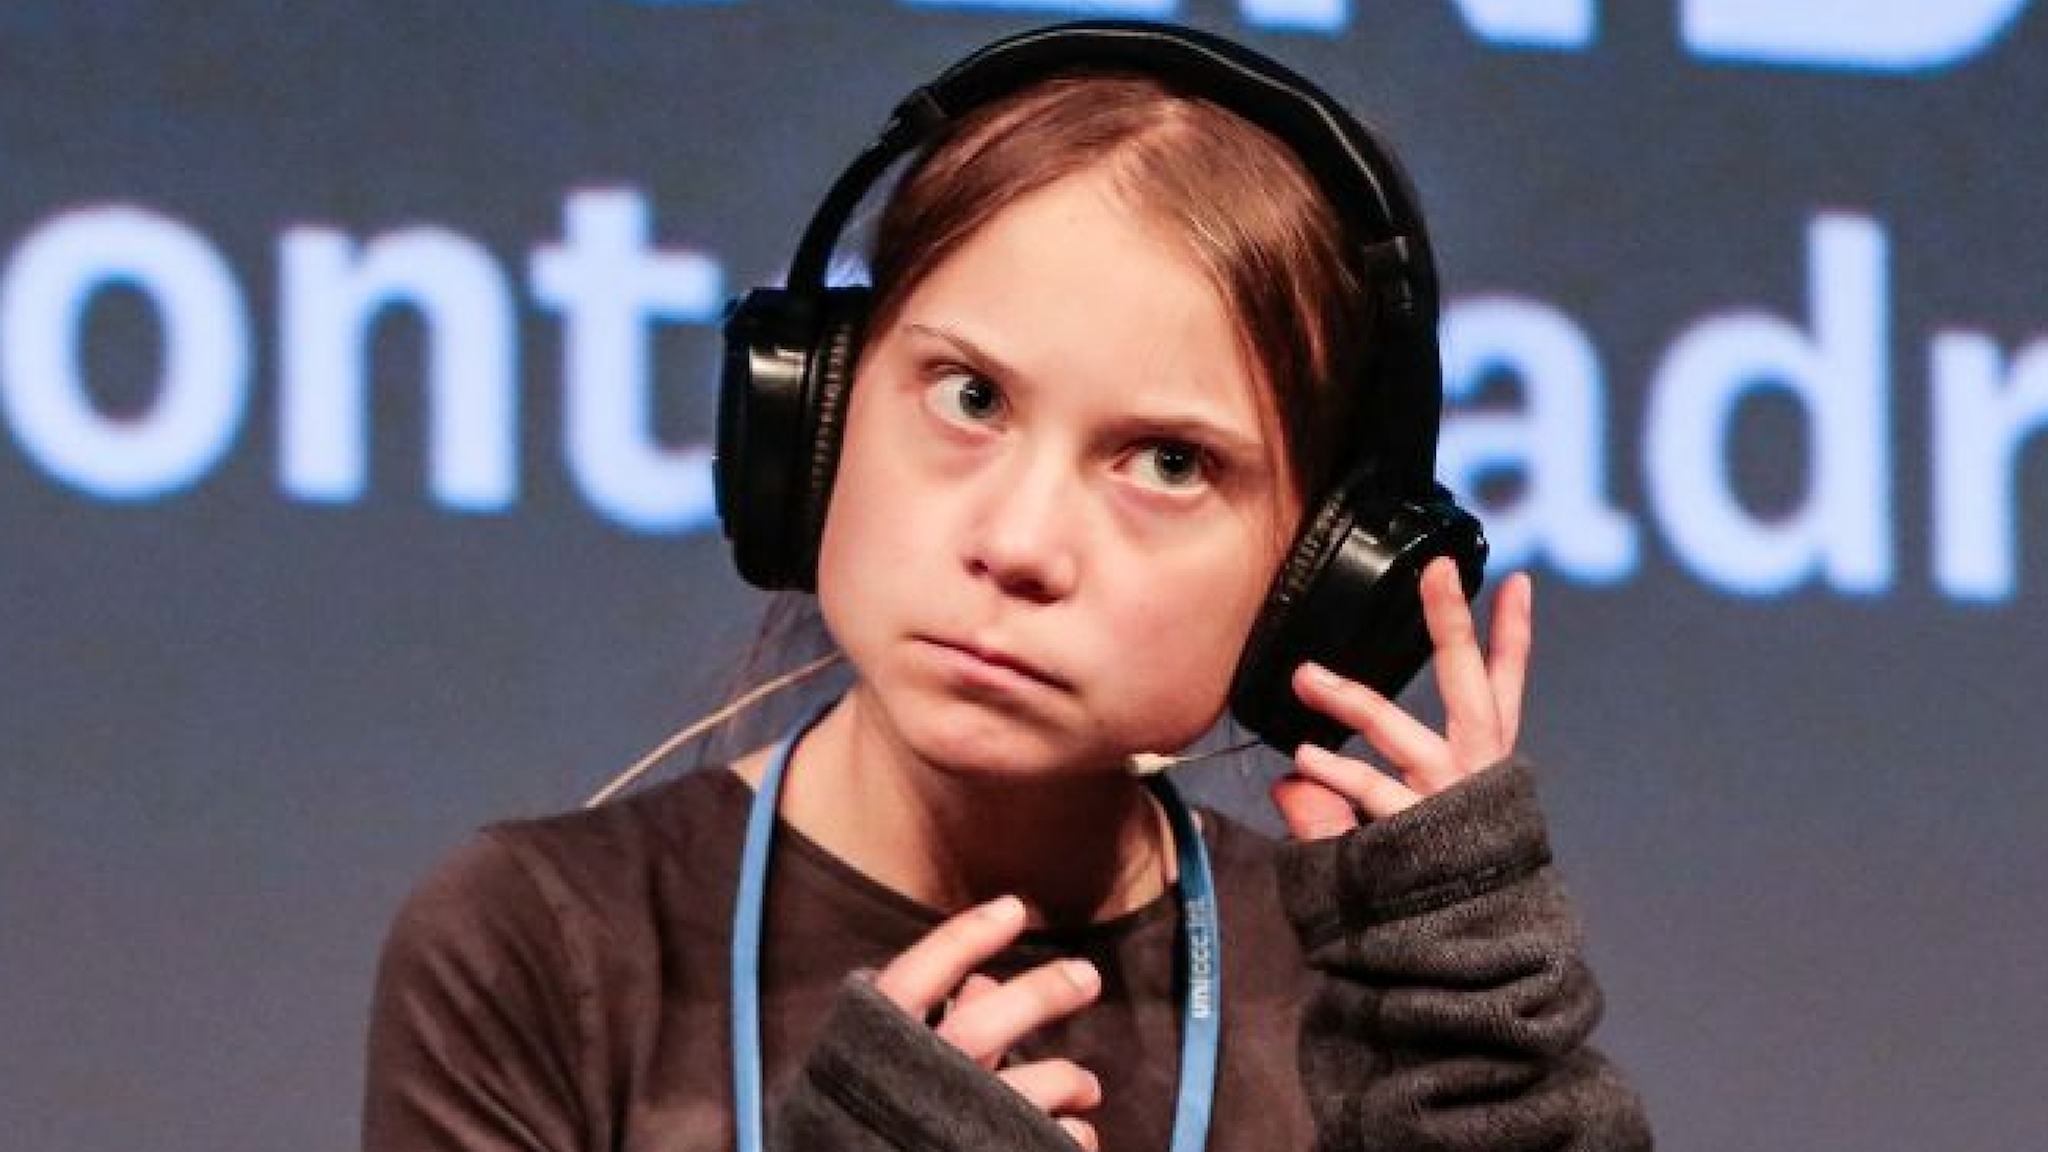 Swedish Climate activist Greta Thunberg attends the Youth Climate-Fridays press conference at La Casa Encendida on December 6, 2019 in Madrid, Spain.